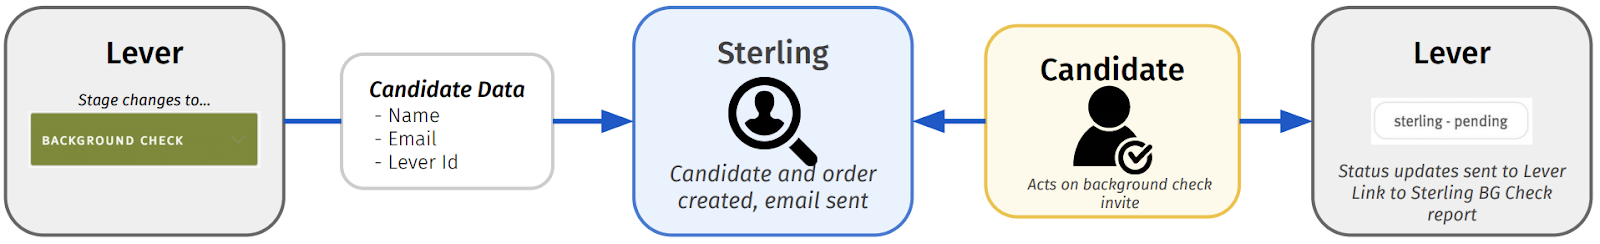 Workflow between sterling and Lever